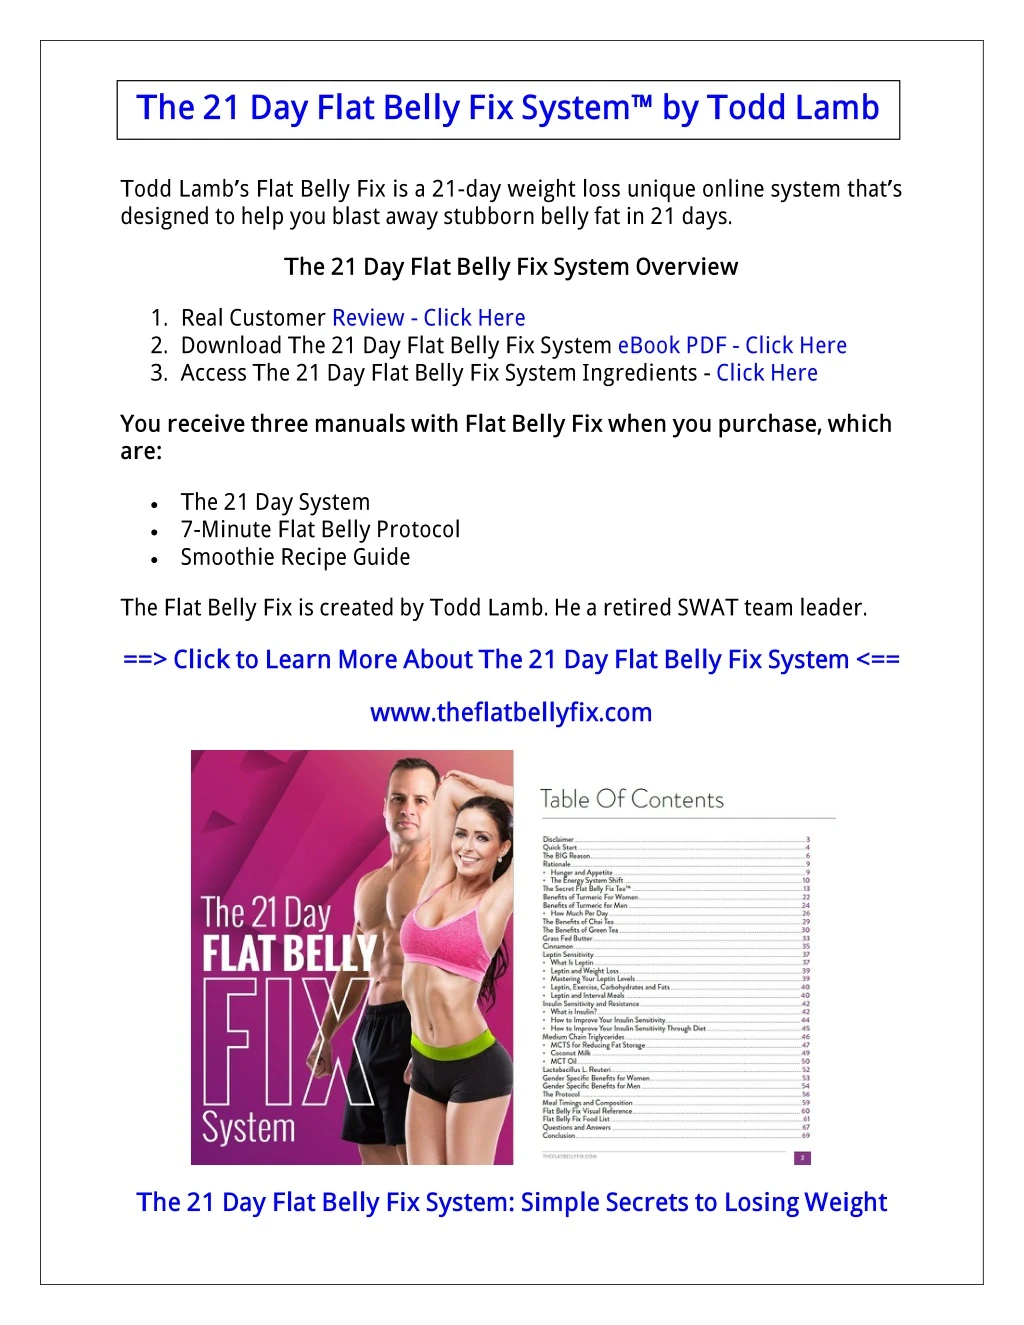 the 21 day flat belly fix system by todd lamb